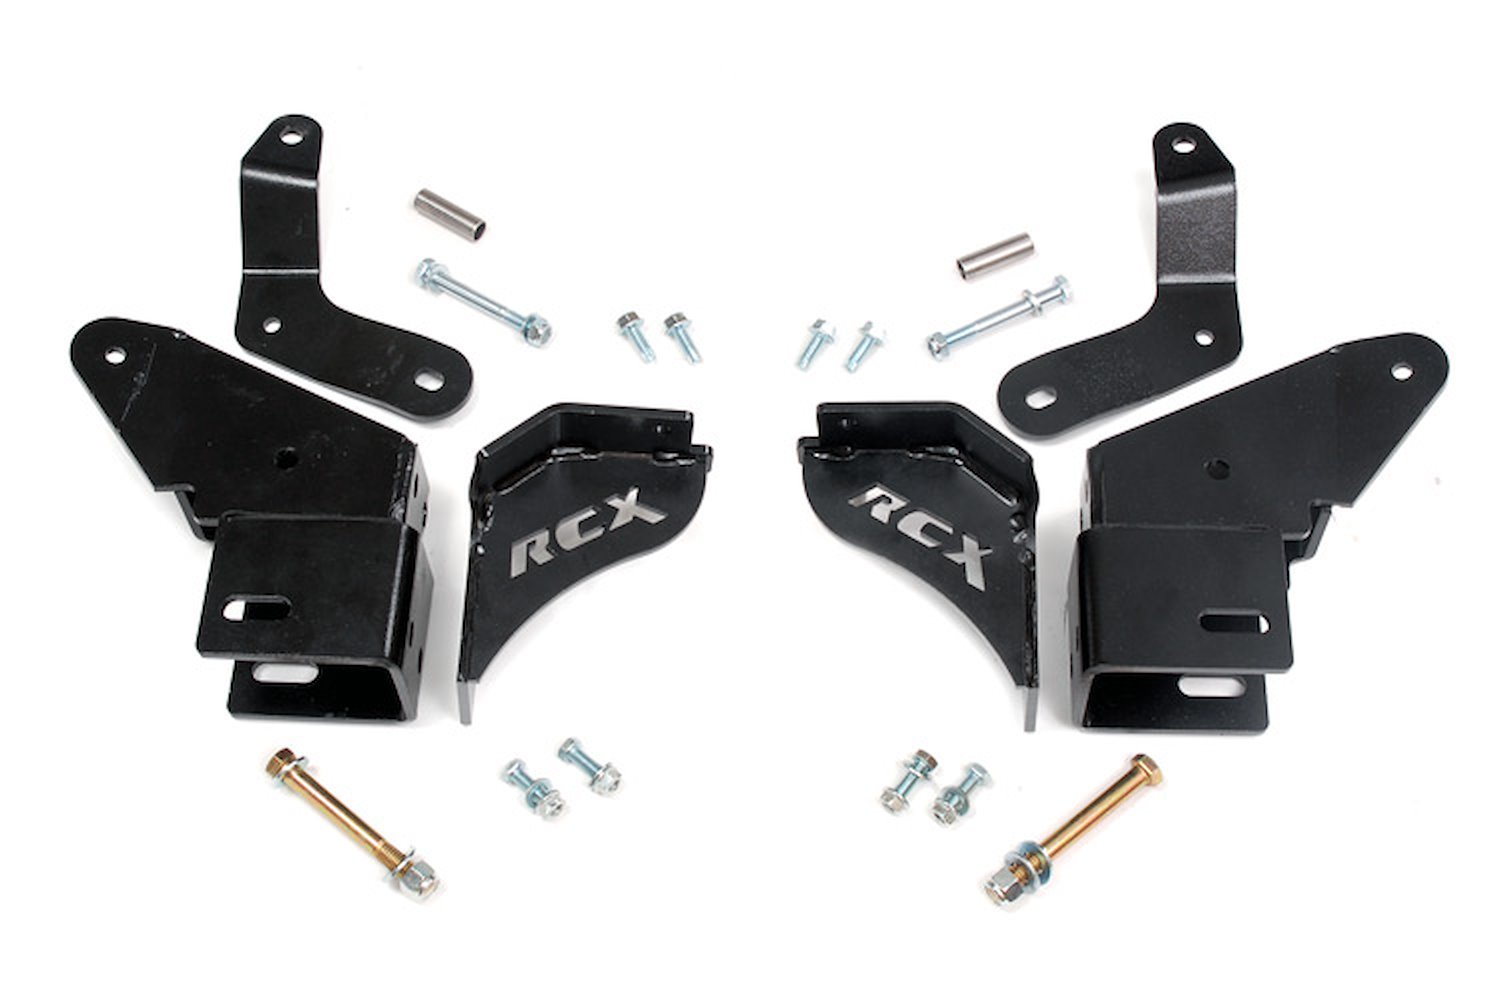 1627 Control Arm Drop/Relocation Kit for 4.5-6.5-inch Lifts